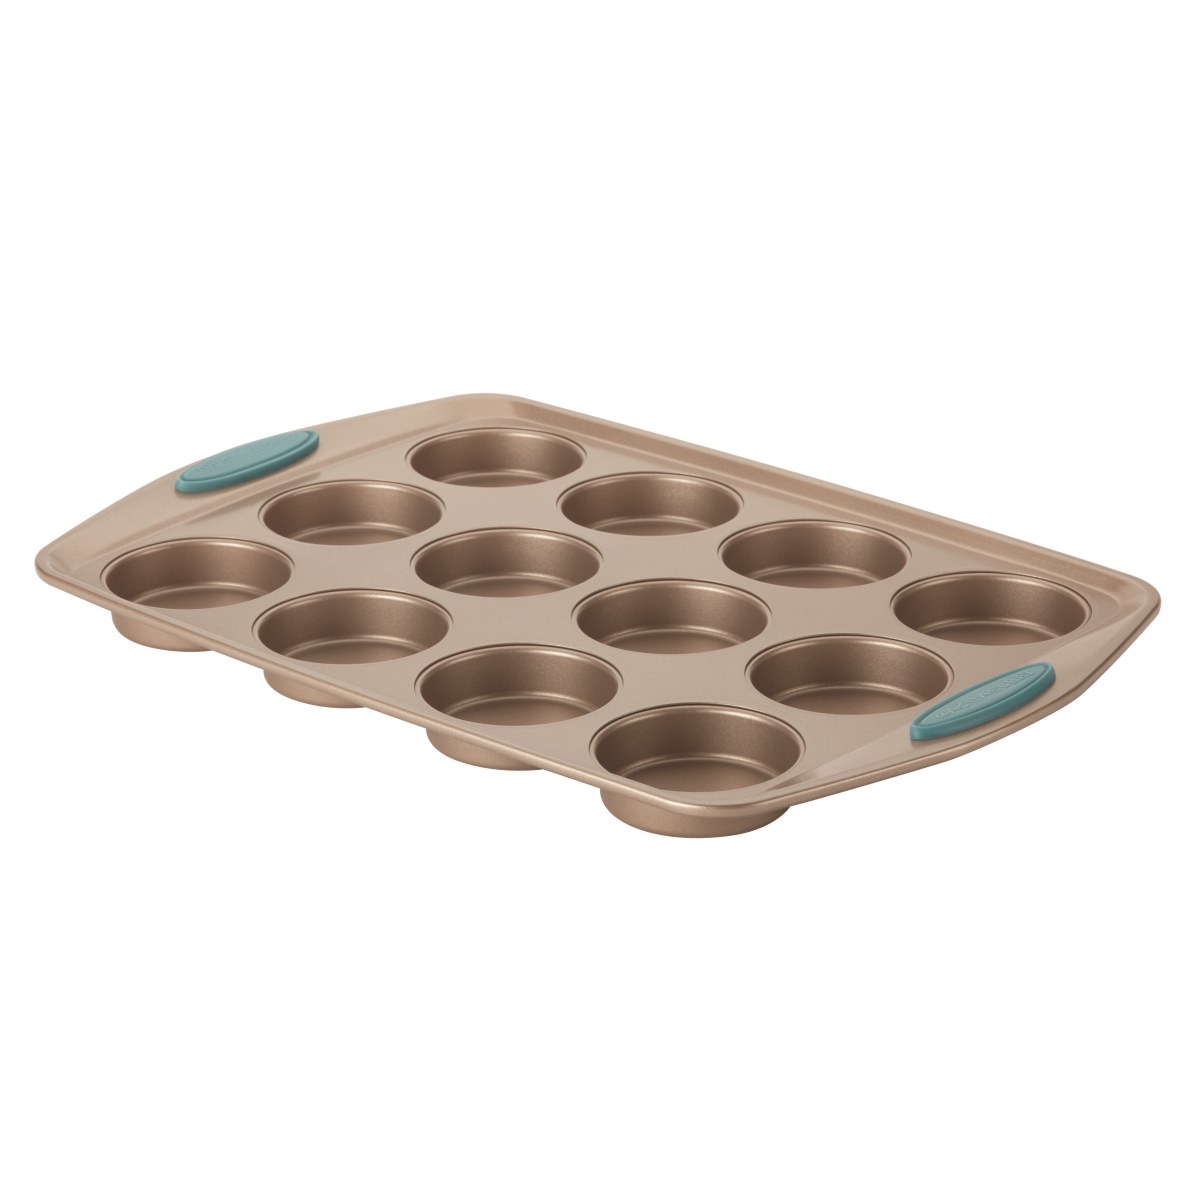 46684 Cucina Nonstick Bakeware 12-cup Muffin Cupcake Pan Agave Blue Handle Grips, Latte Brown